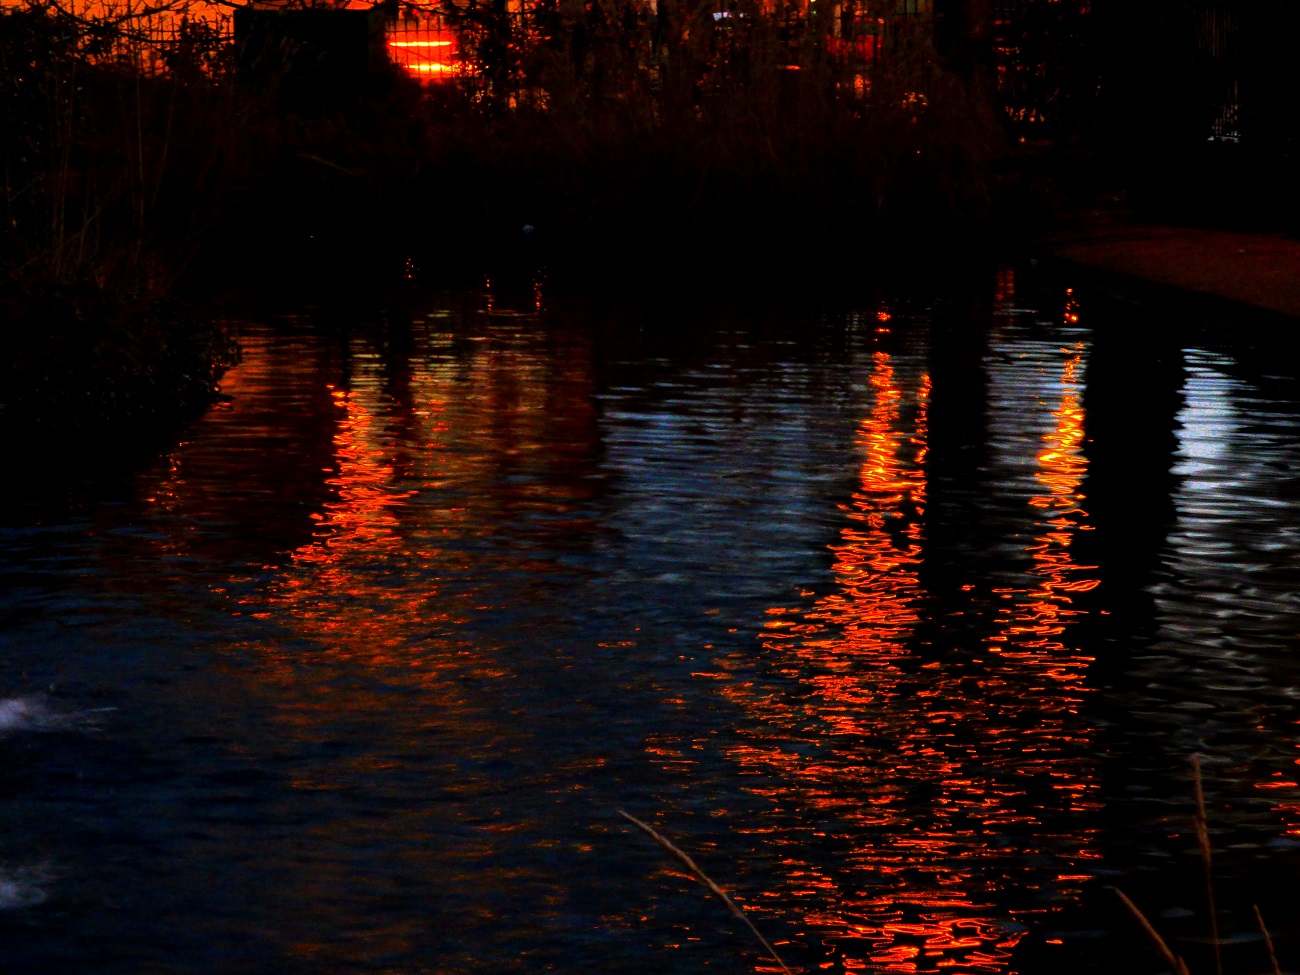 20170114_Hackney_Lower-Clapton-Pond_Evening-Reflections